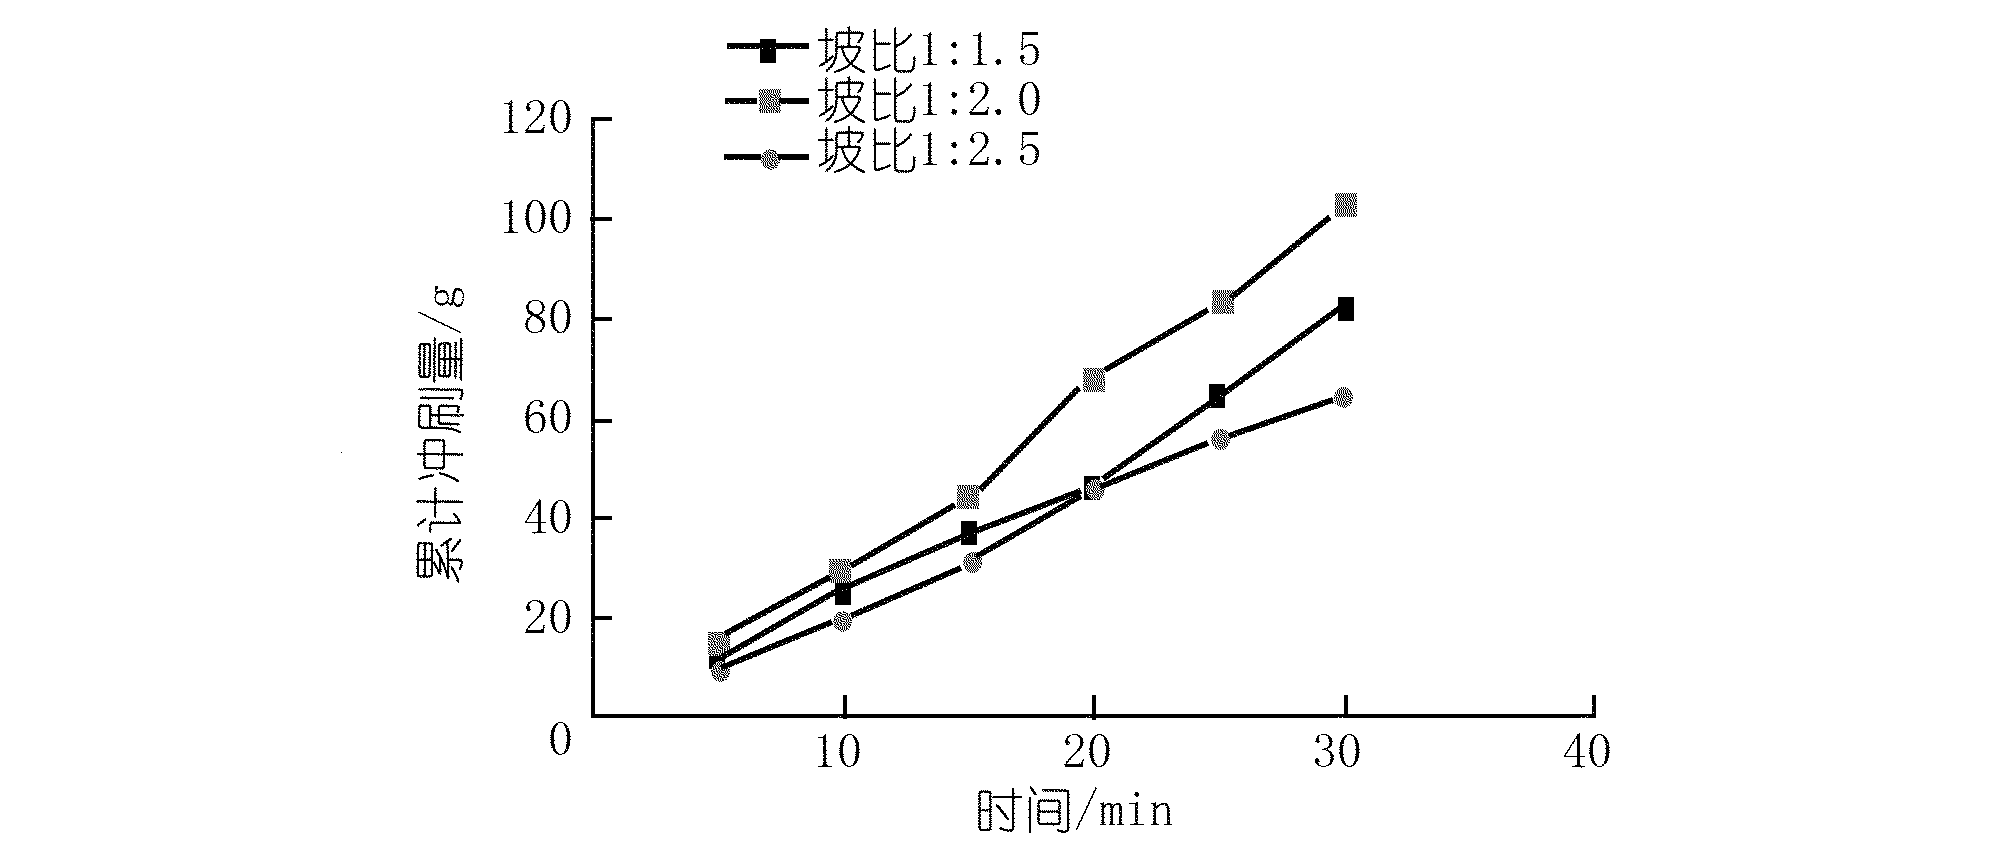 the amount of flushing of the non-compartment slope under different slope ratios